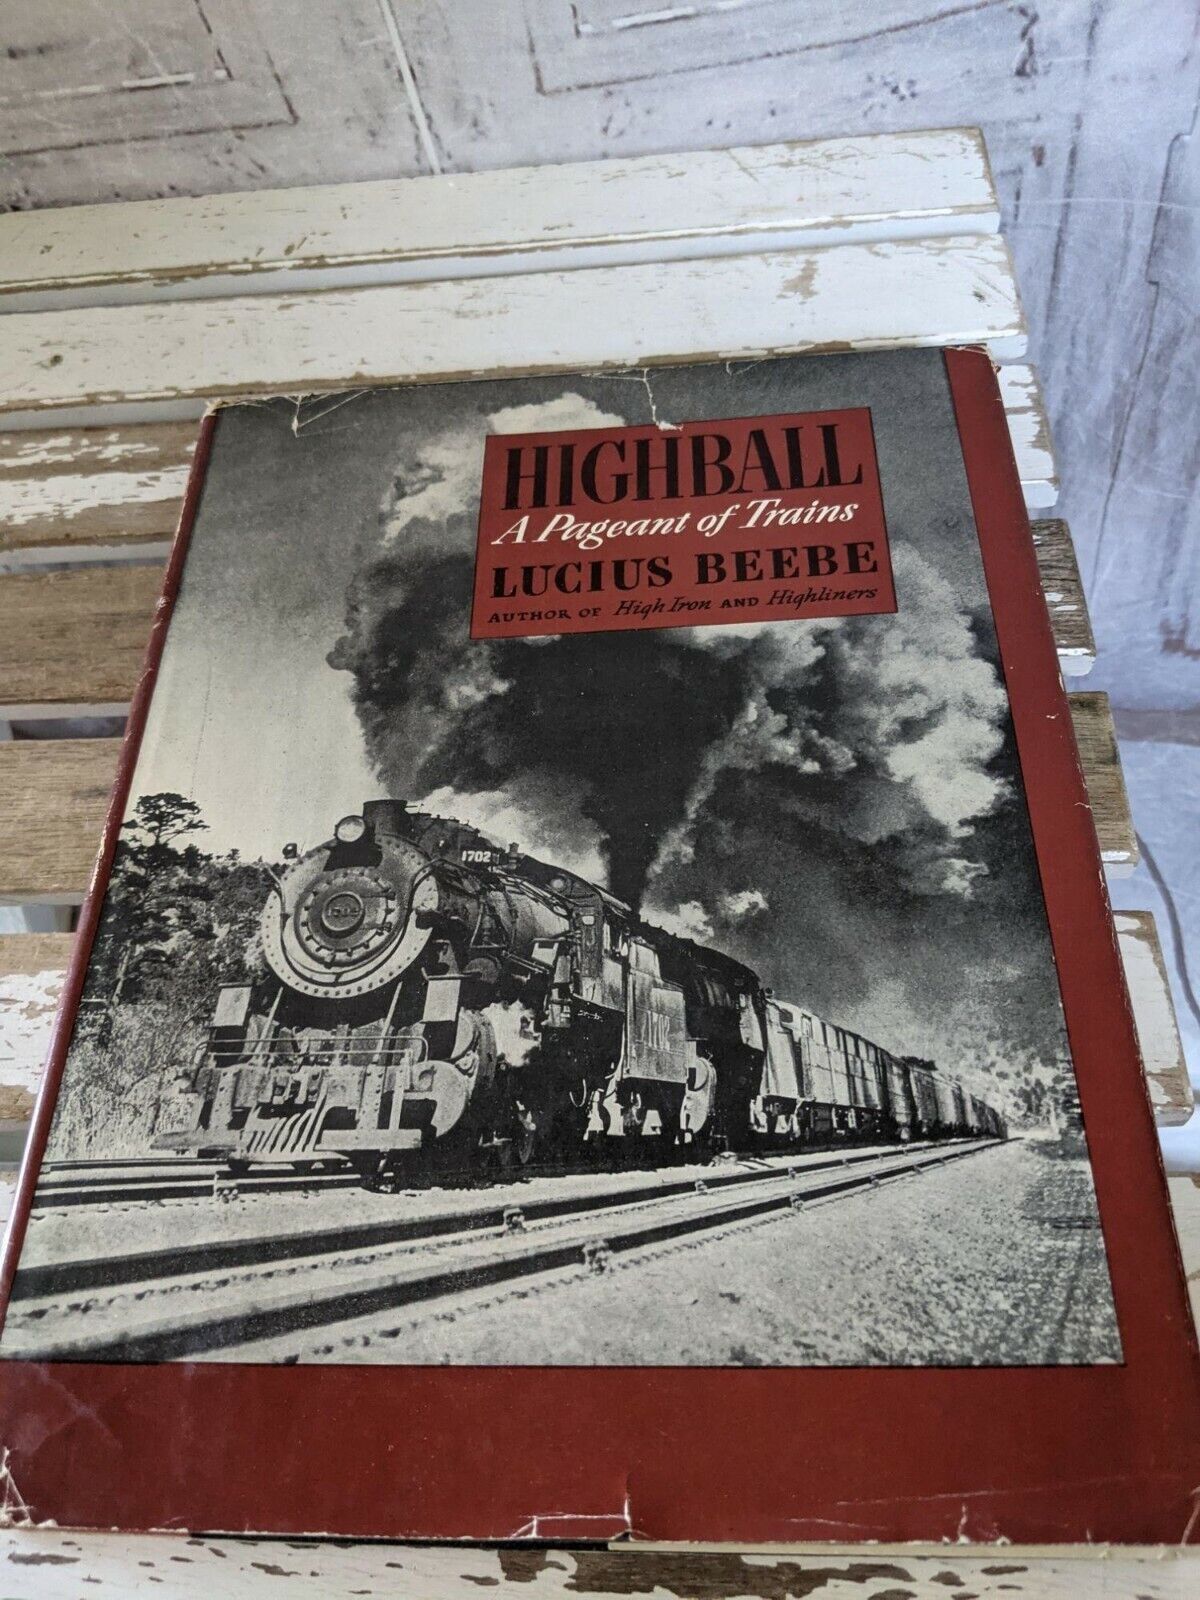 Highball A pageant trains Lucius Beebe book 1945 hardcover trains locomotive Vtg